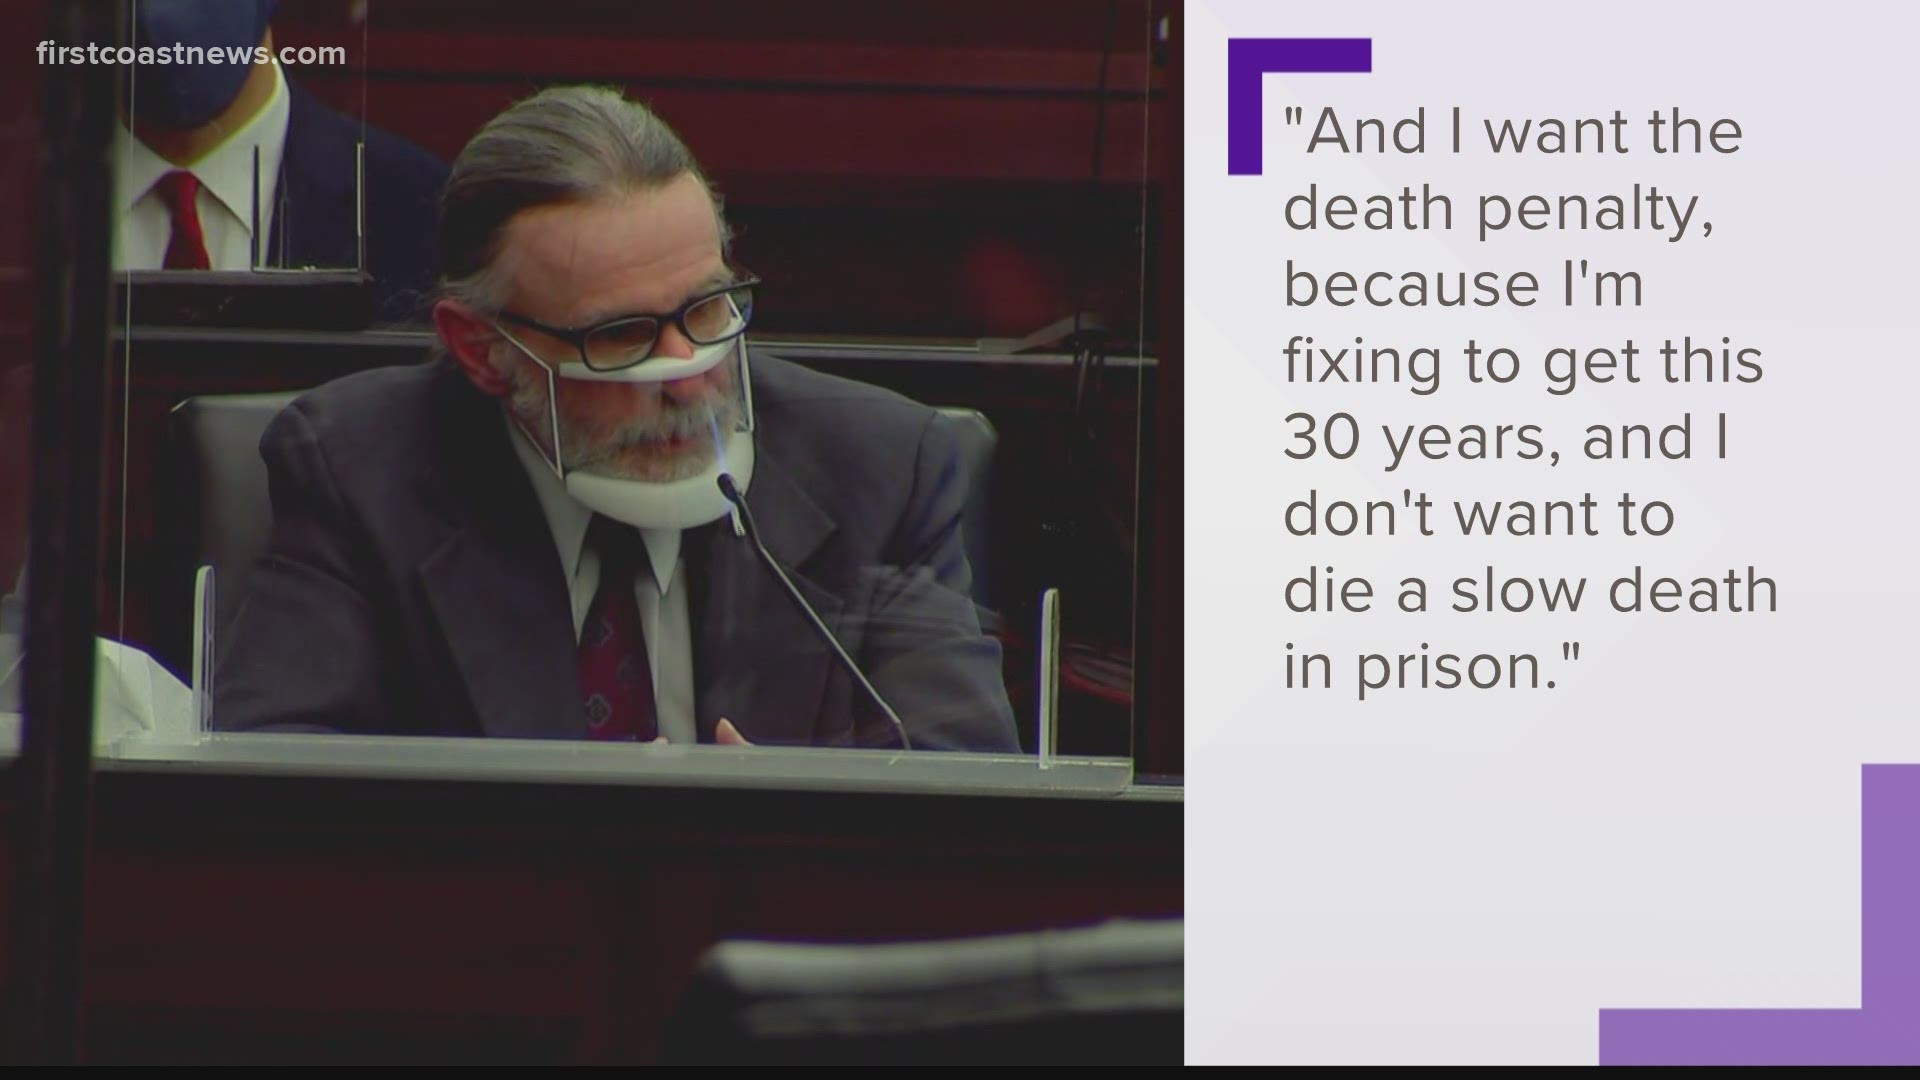 'House of Horrors' death penalty trial continues Thursday, prosecution plans to rest case